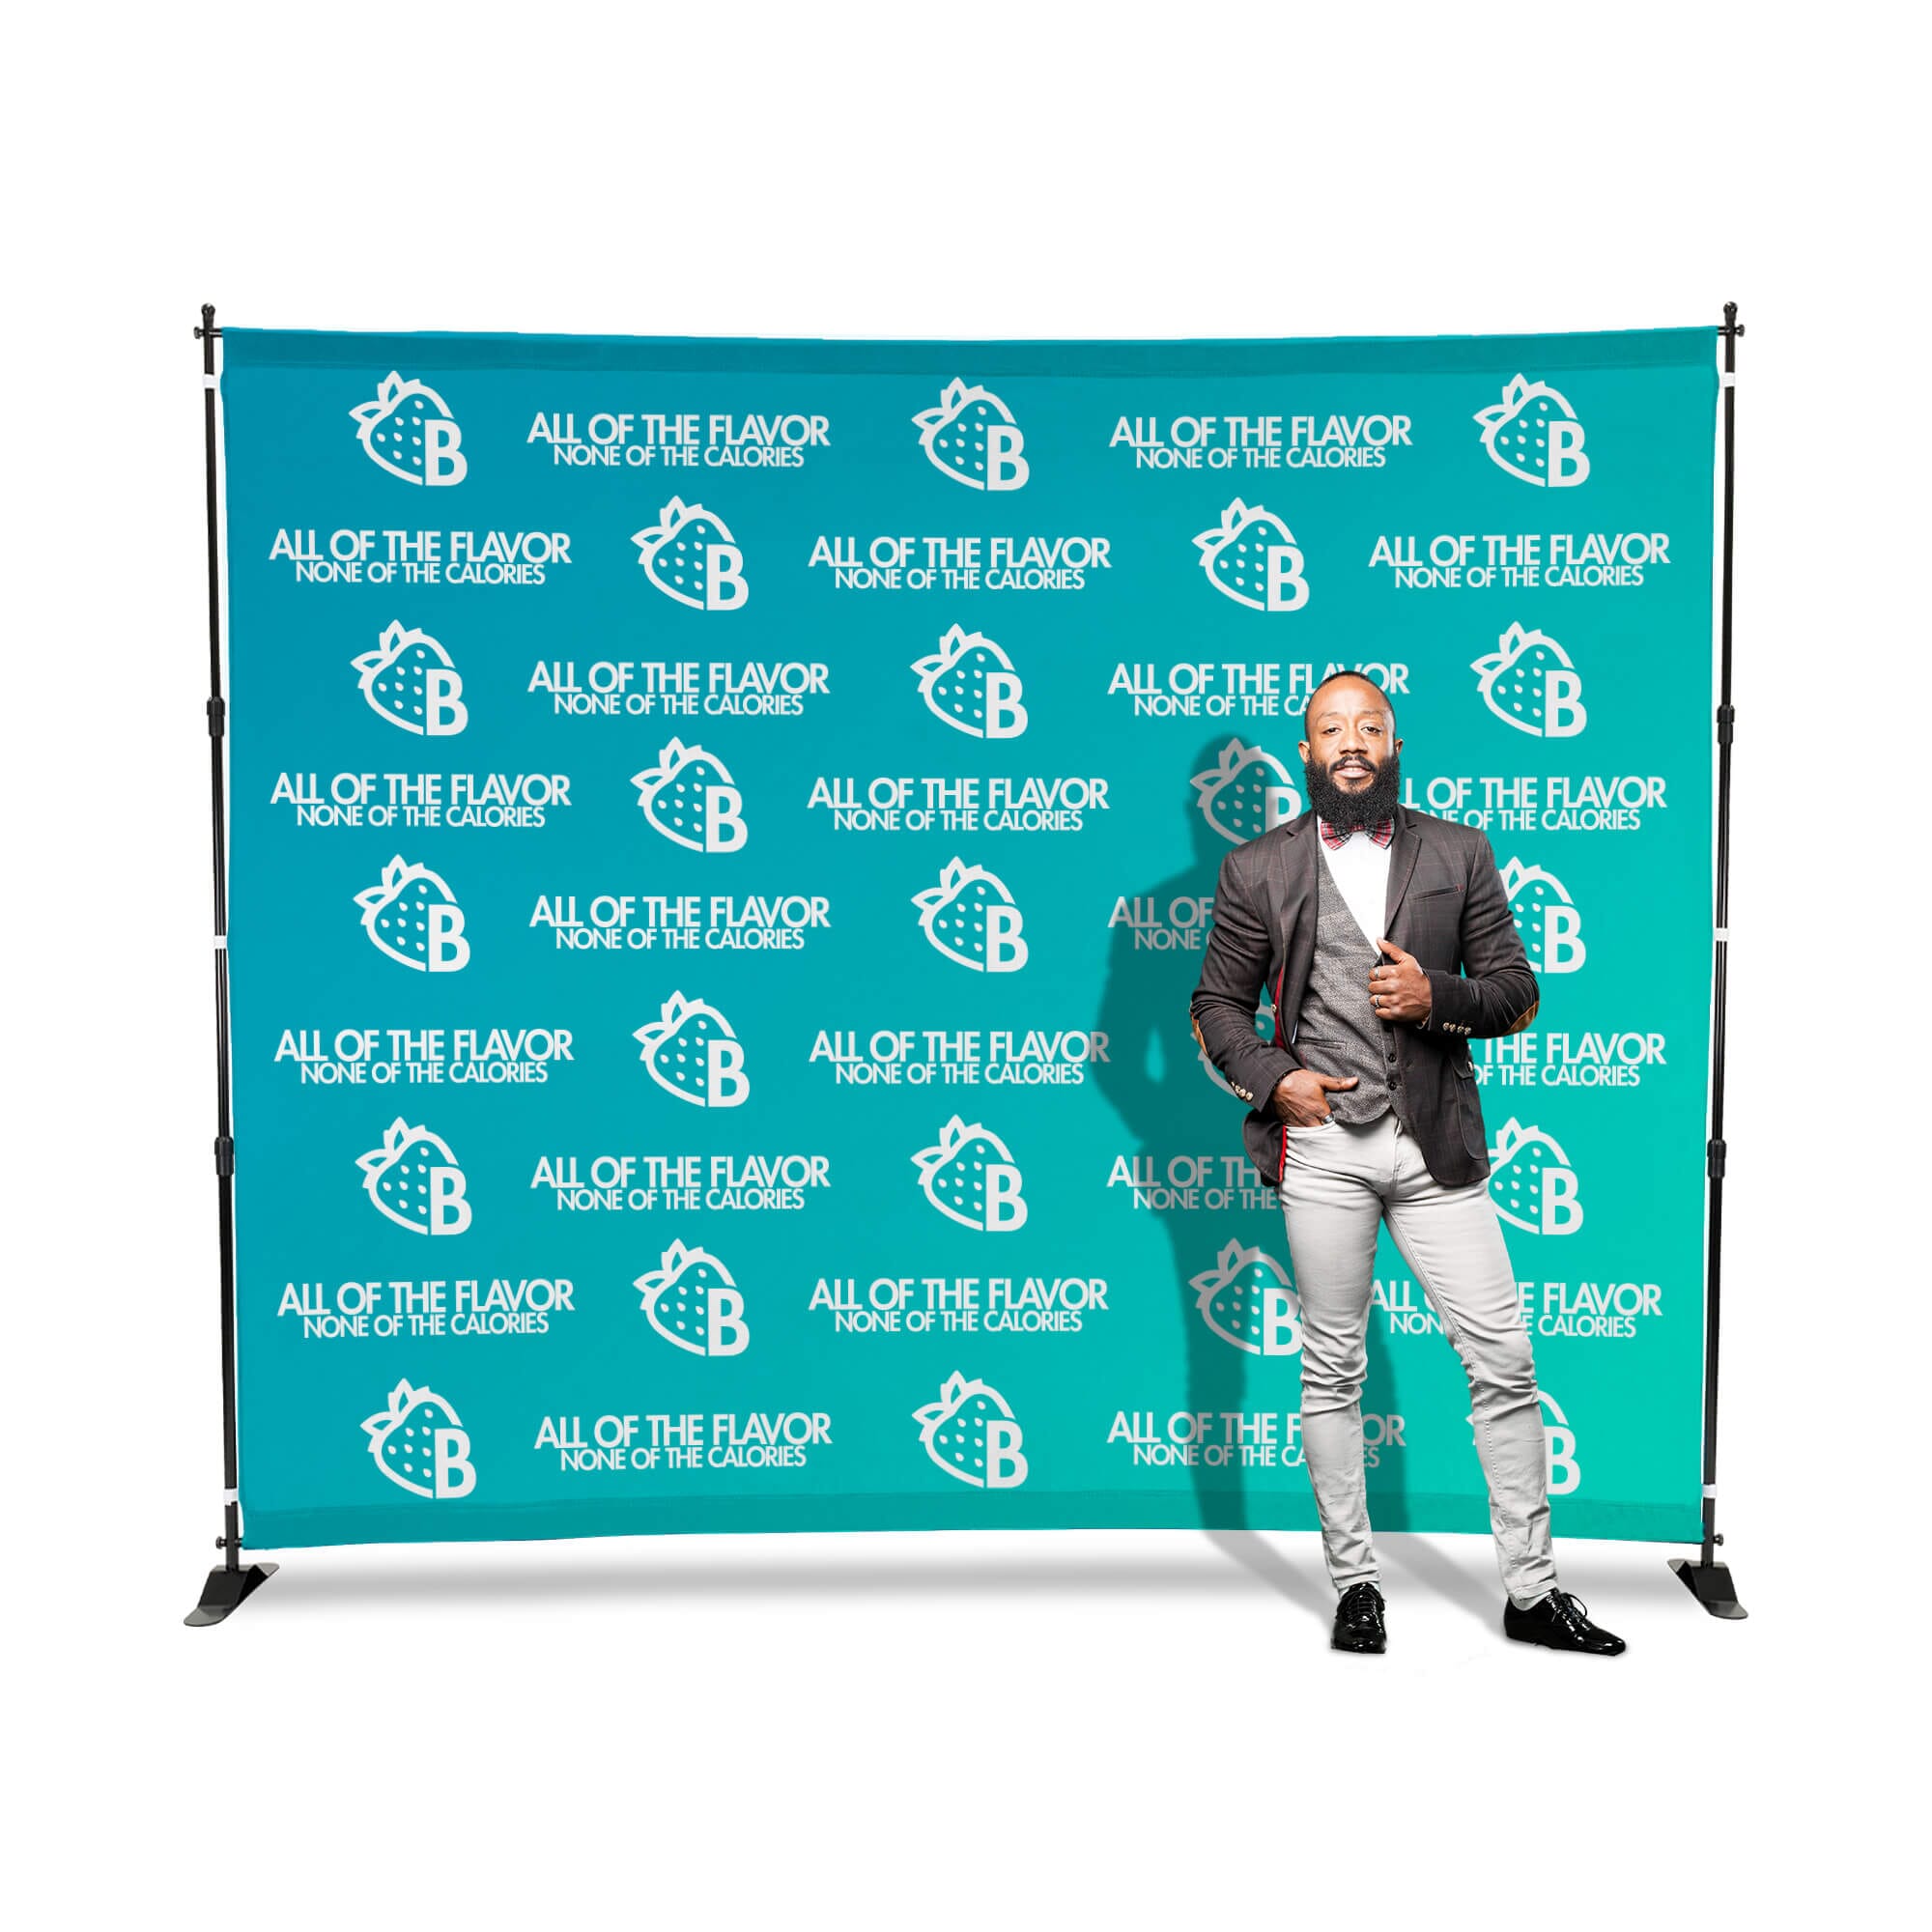 Step & Repeat Event Backdrop / Banner Stand